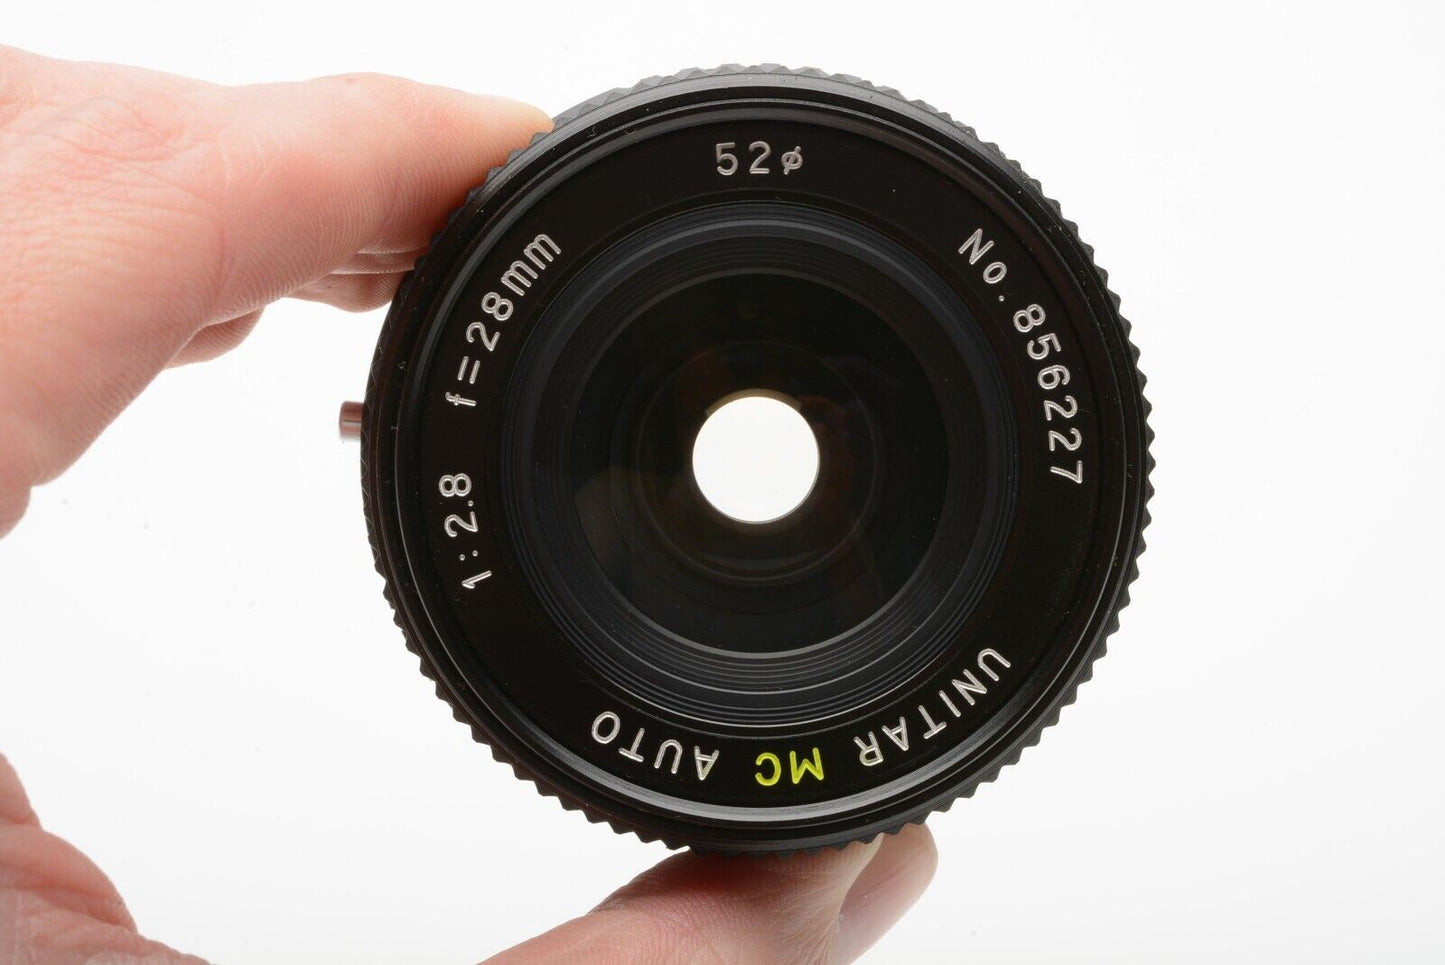 EXC++ UNITAR FOR CANON FD 28mm F2.8 WIDE, CAPS, NICE & SMOOTH